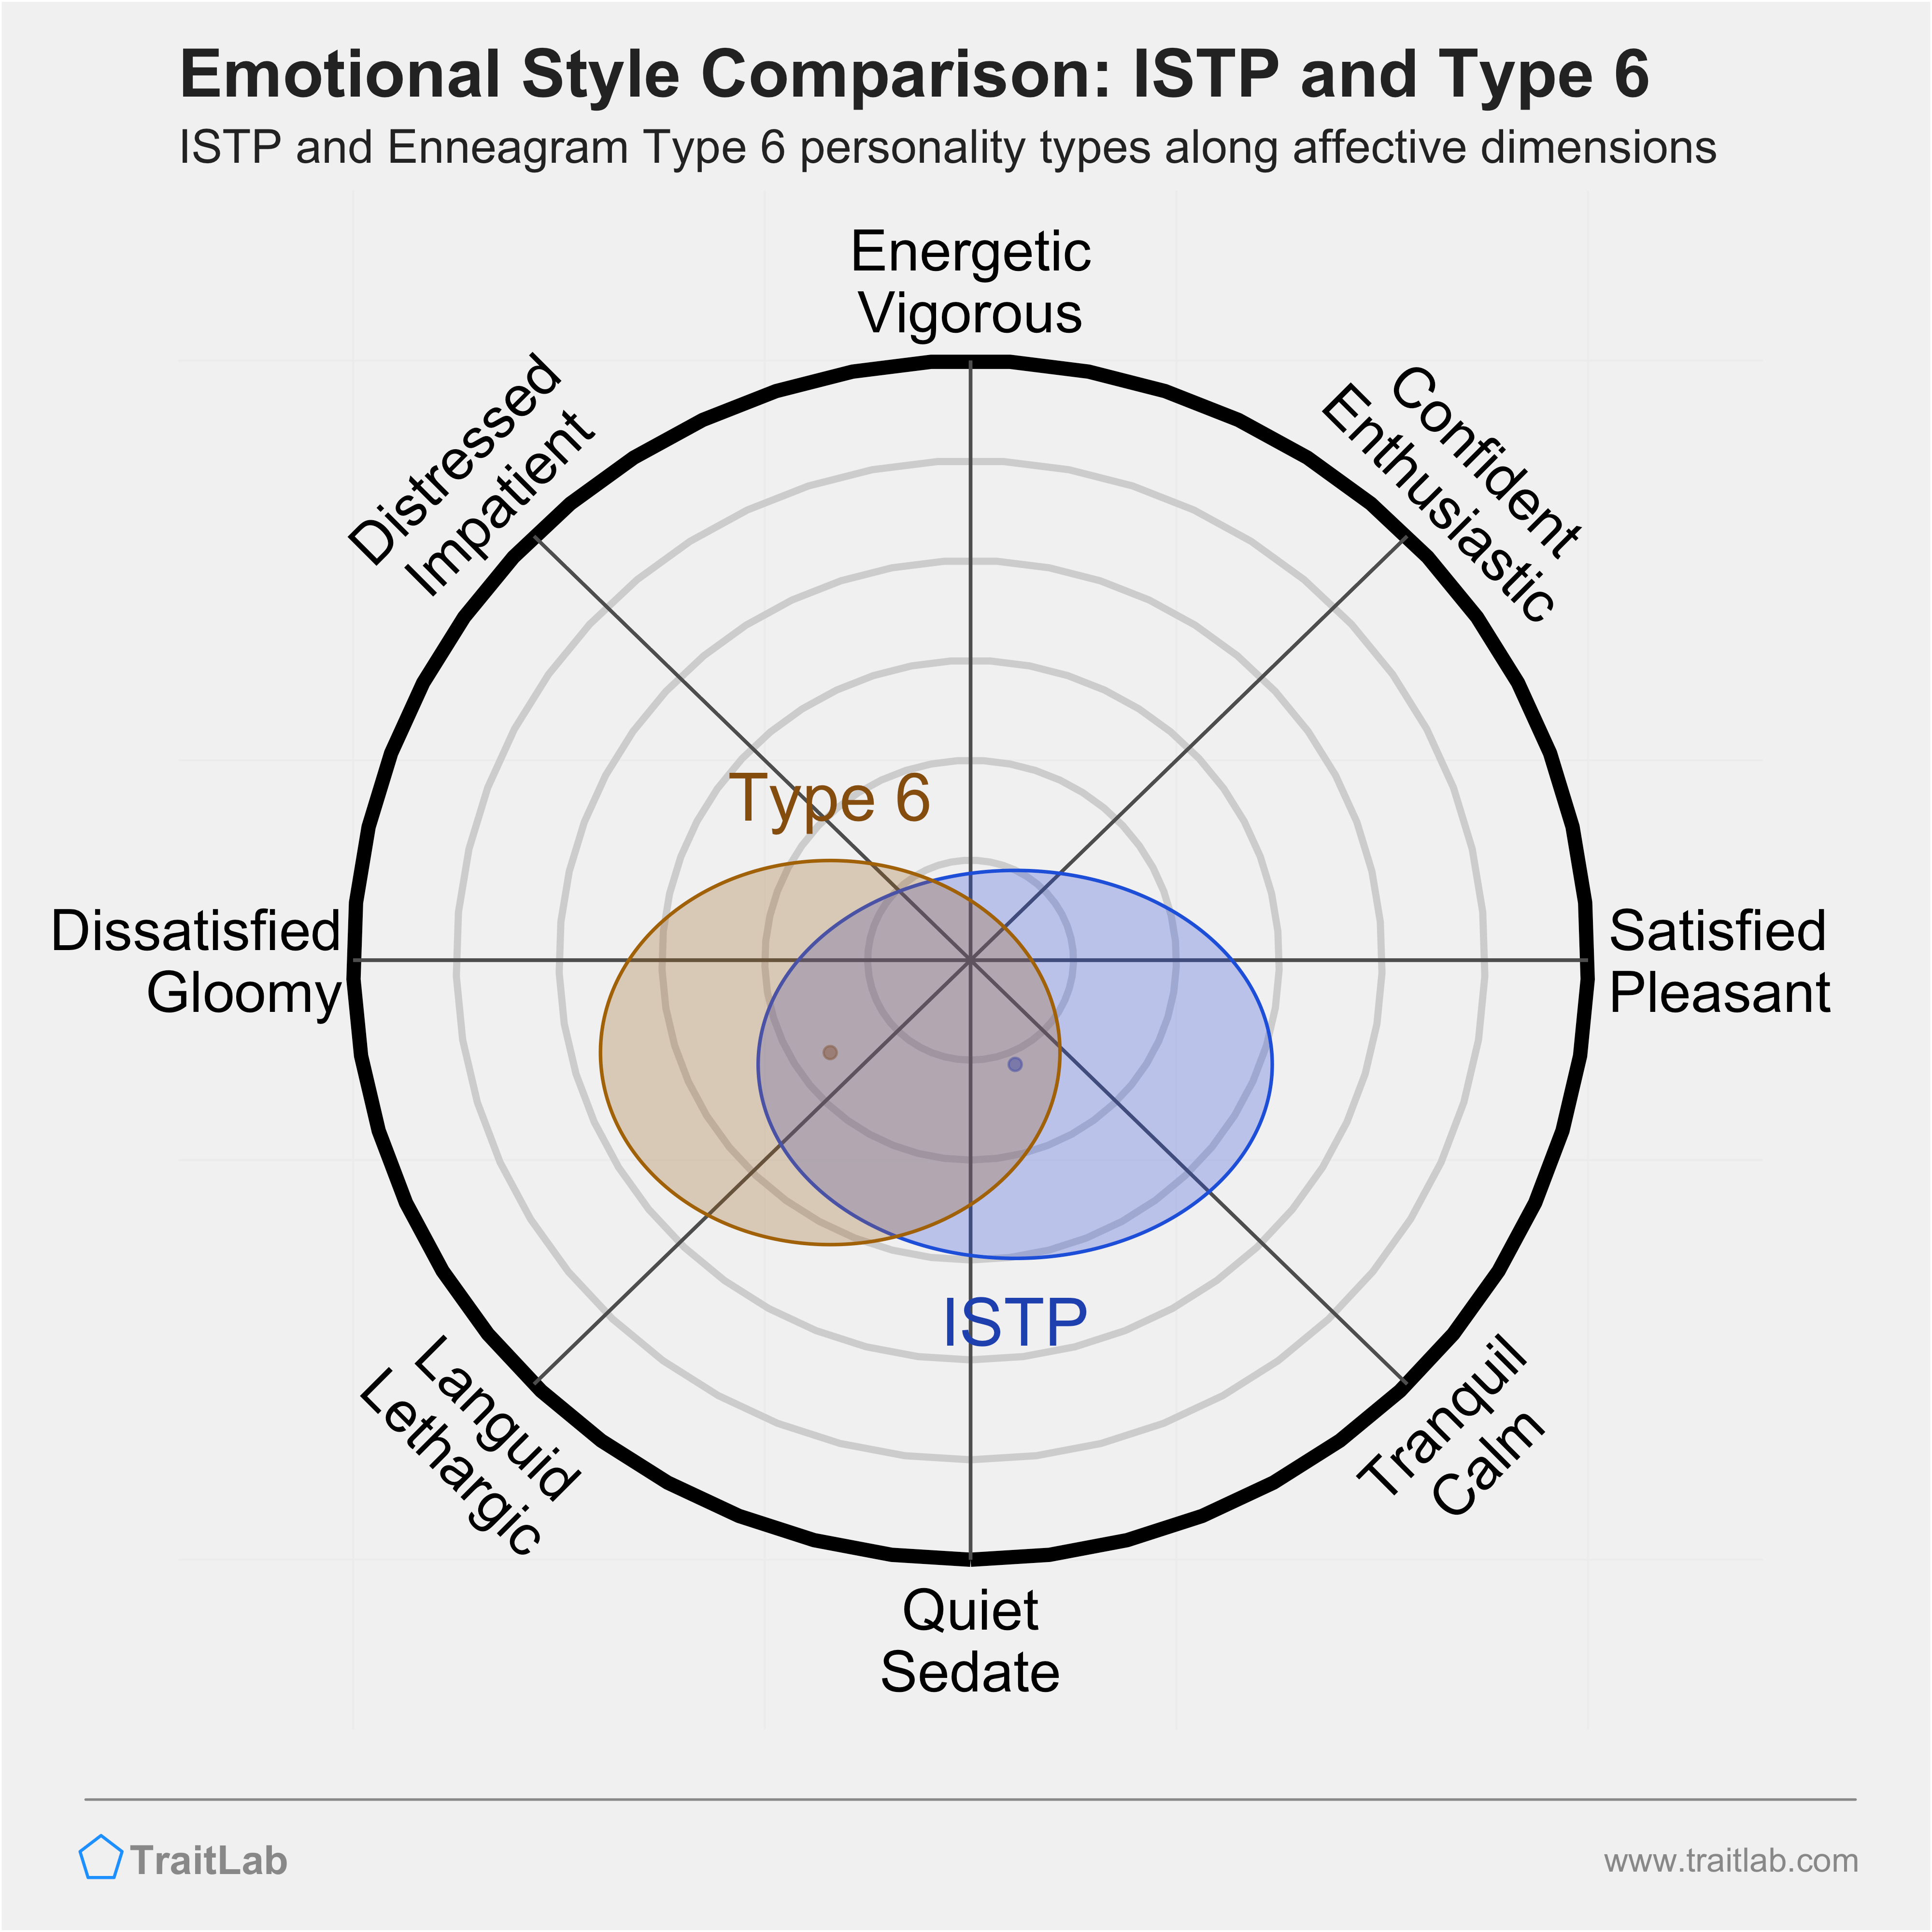 ISTP and Type 6 comparison across emotional (affective) dimensions